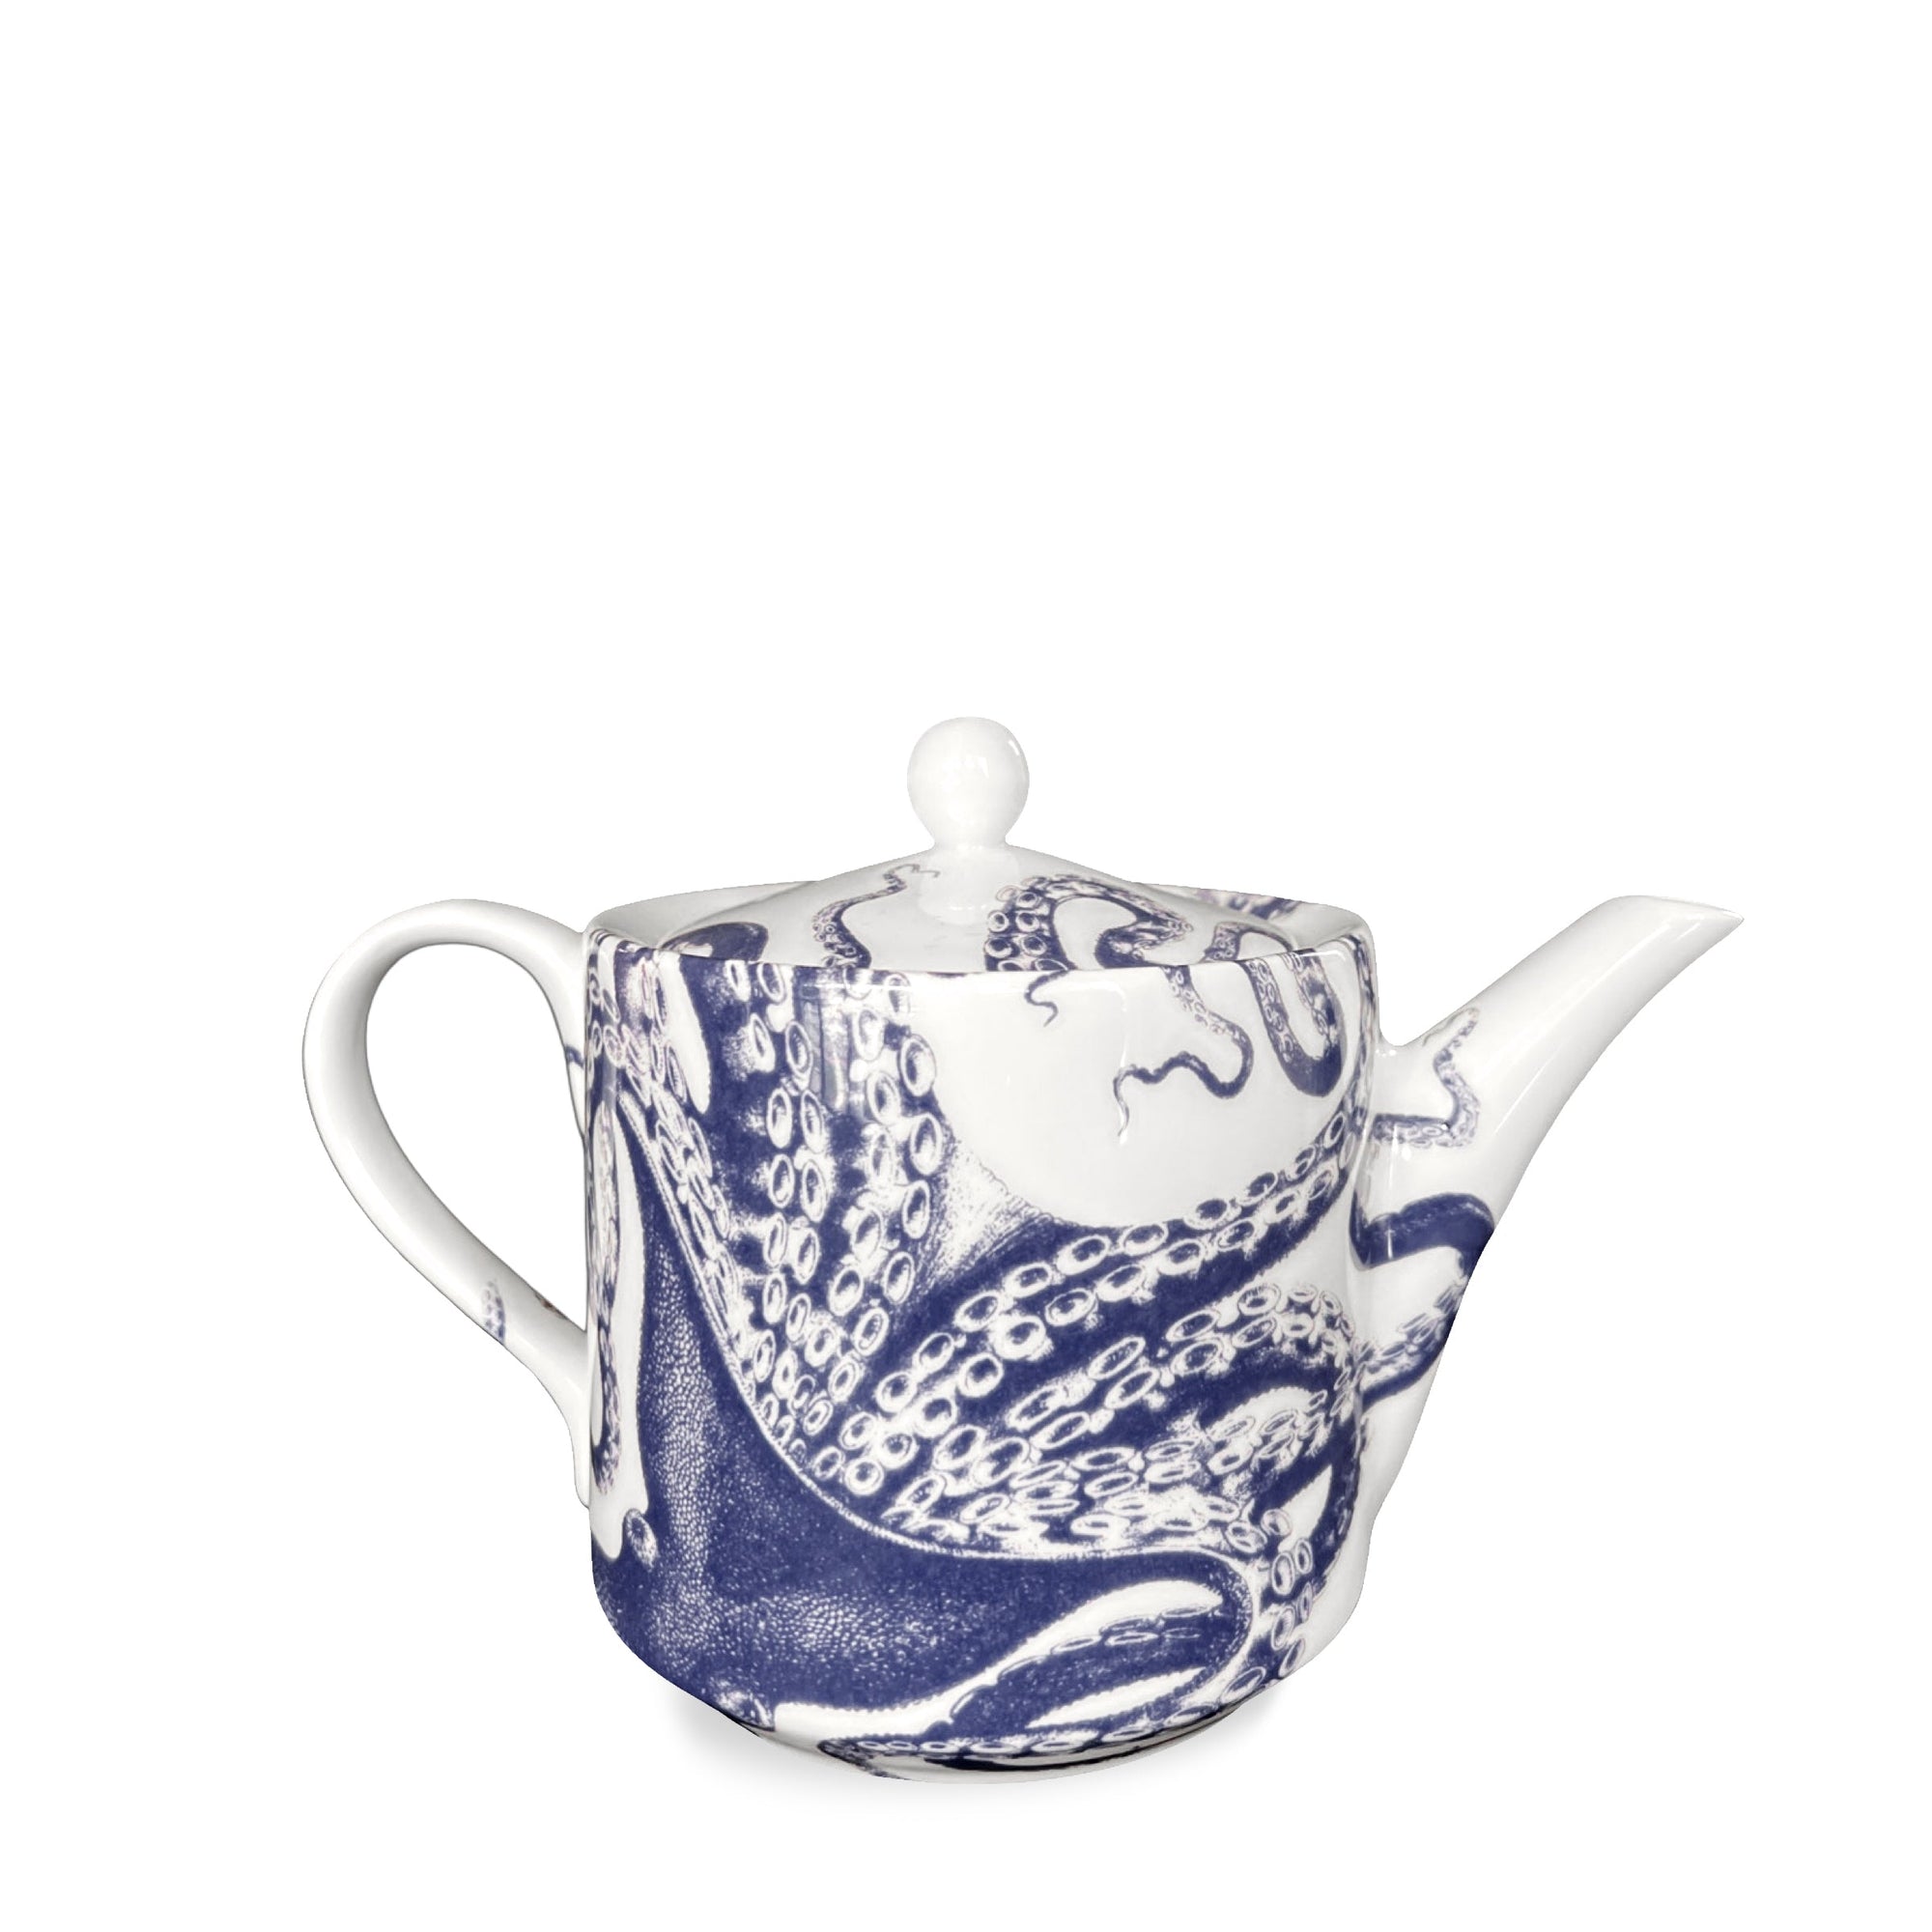 Lucy the octopus blue and white bone china teapot from Caskata.